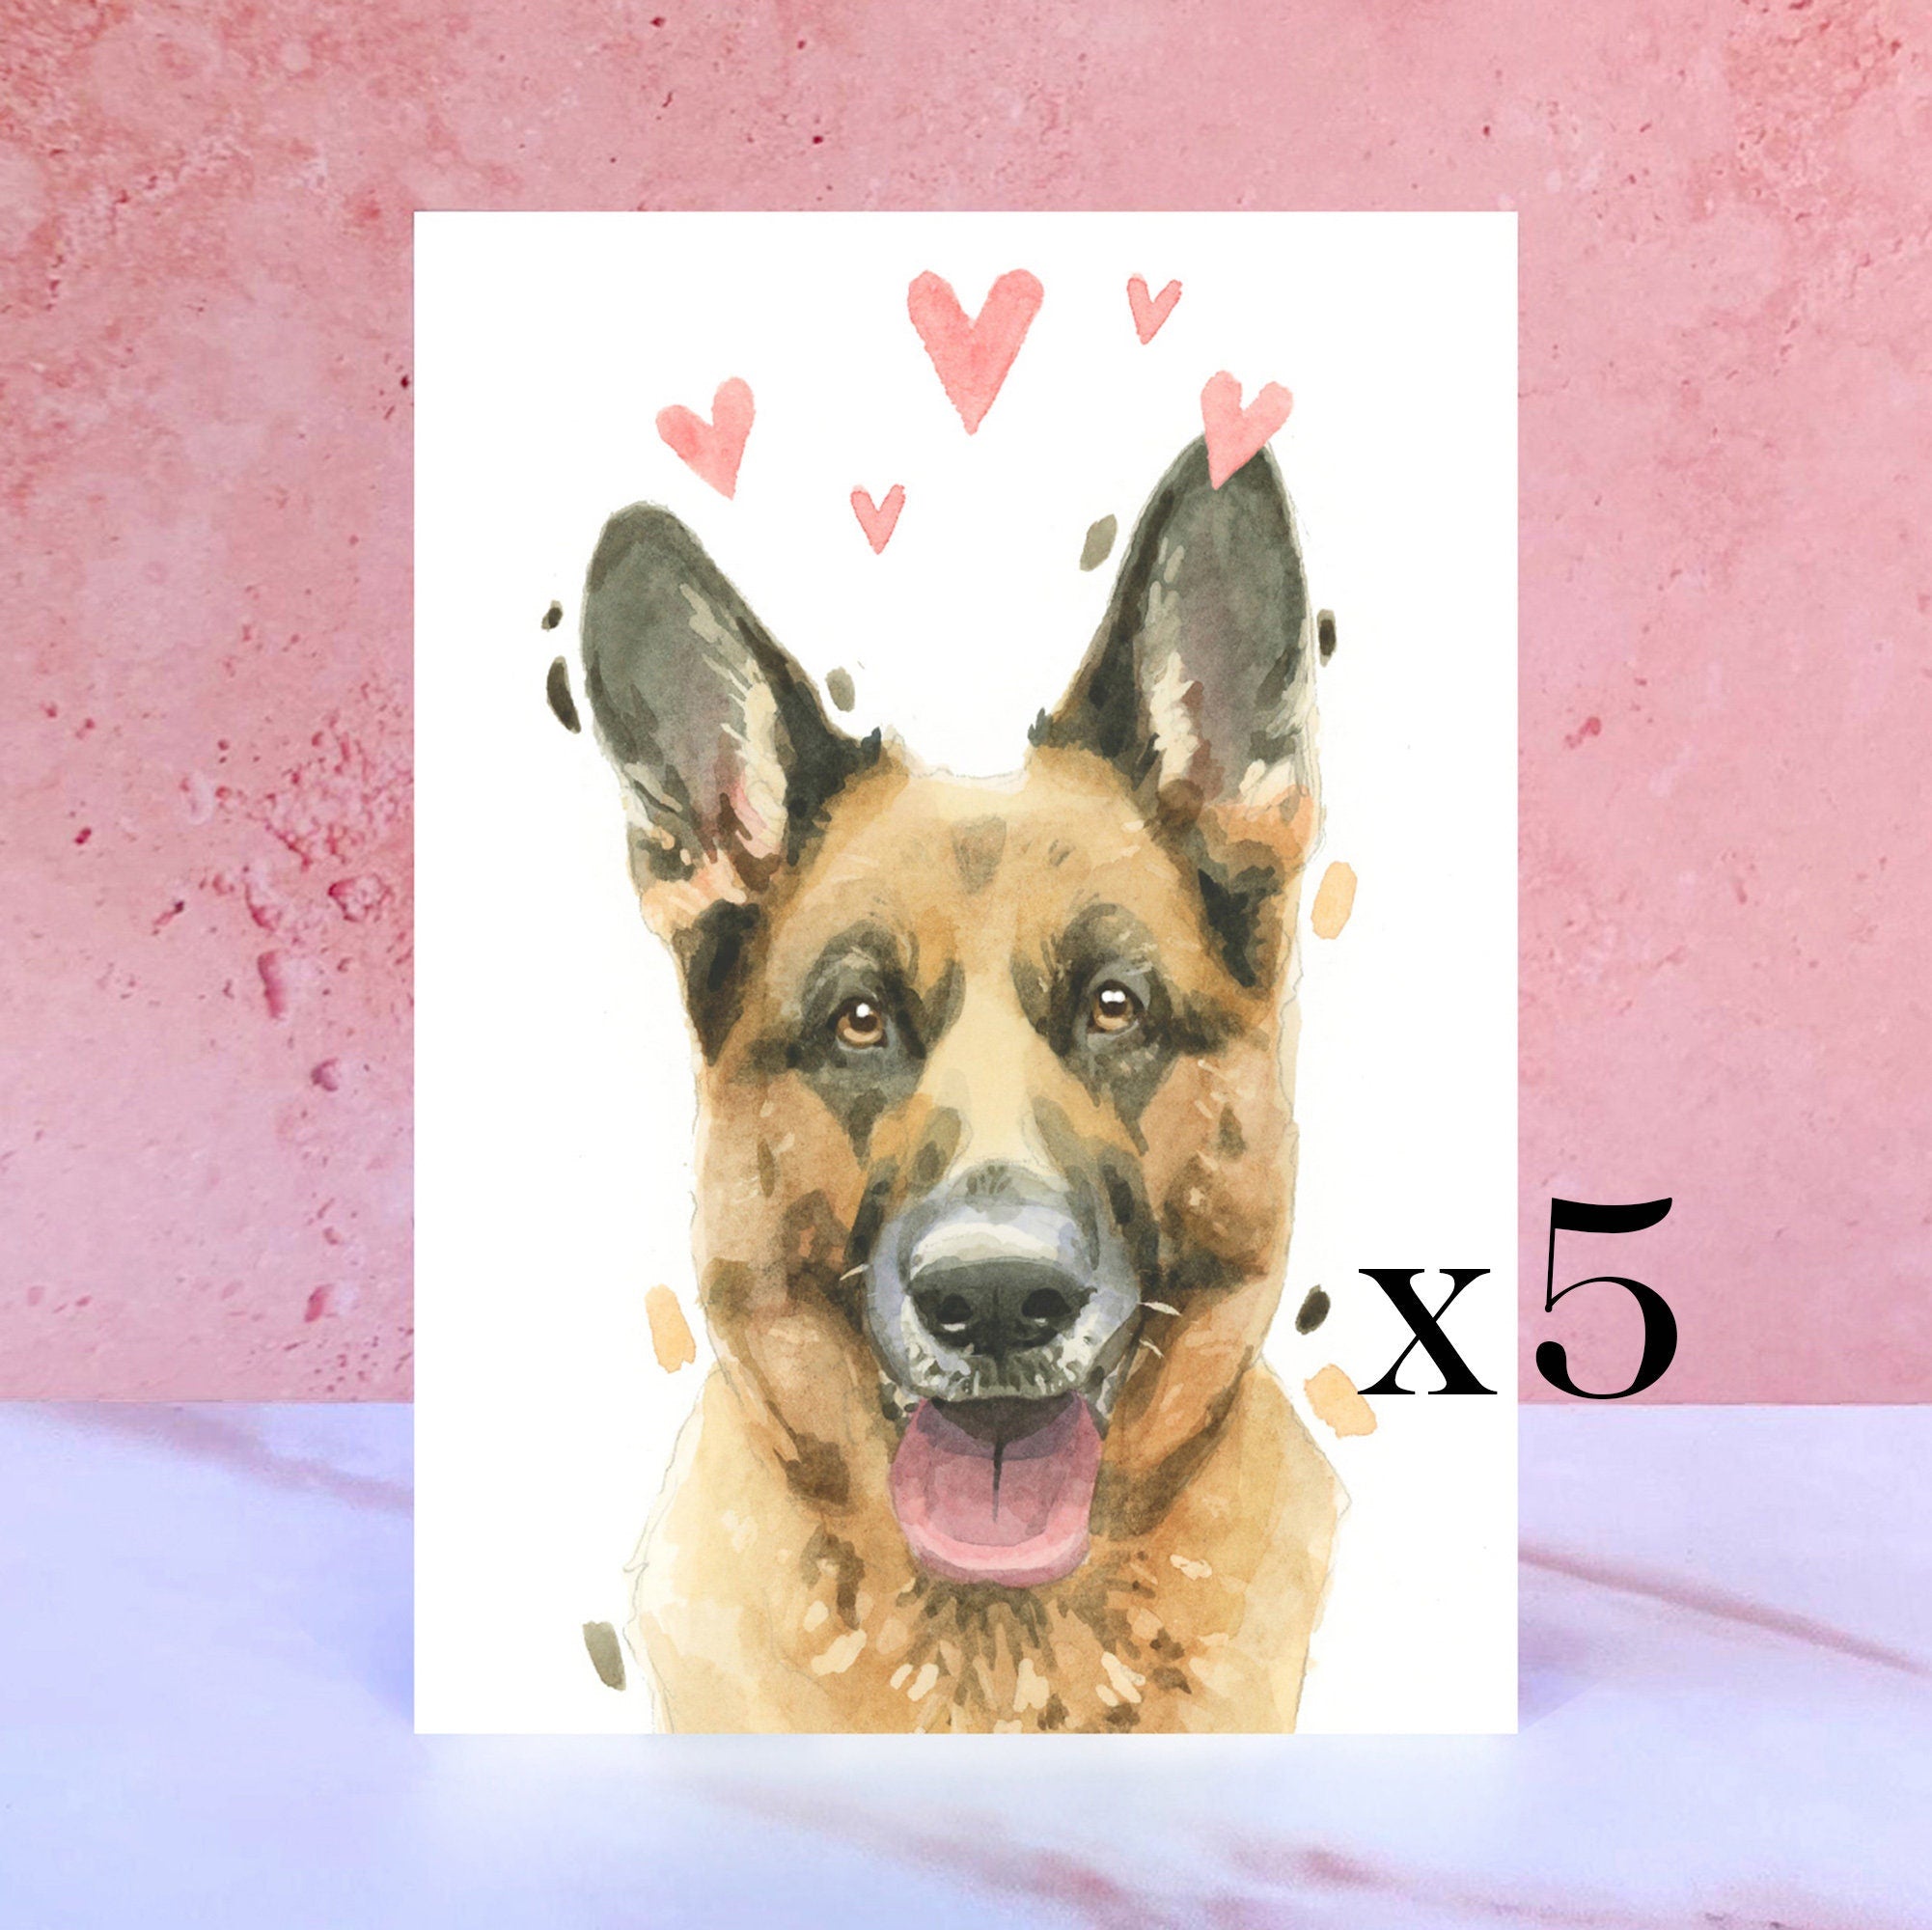 Pack of 5 German Shepherd Licks & Kisses Card for Valentines, Anniversaries and from the Dog